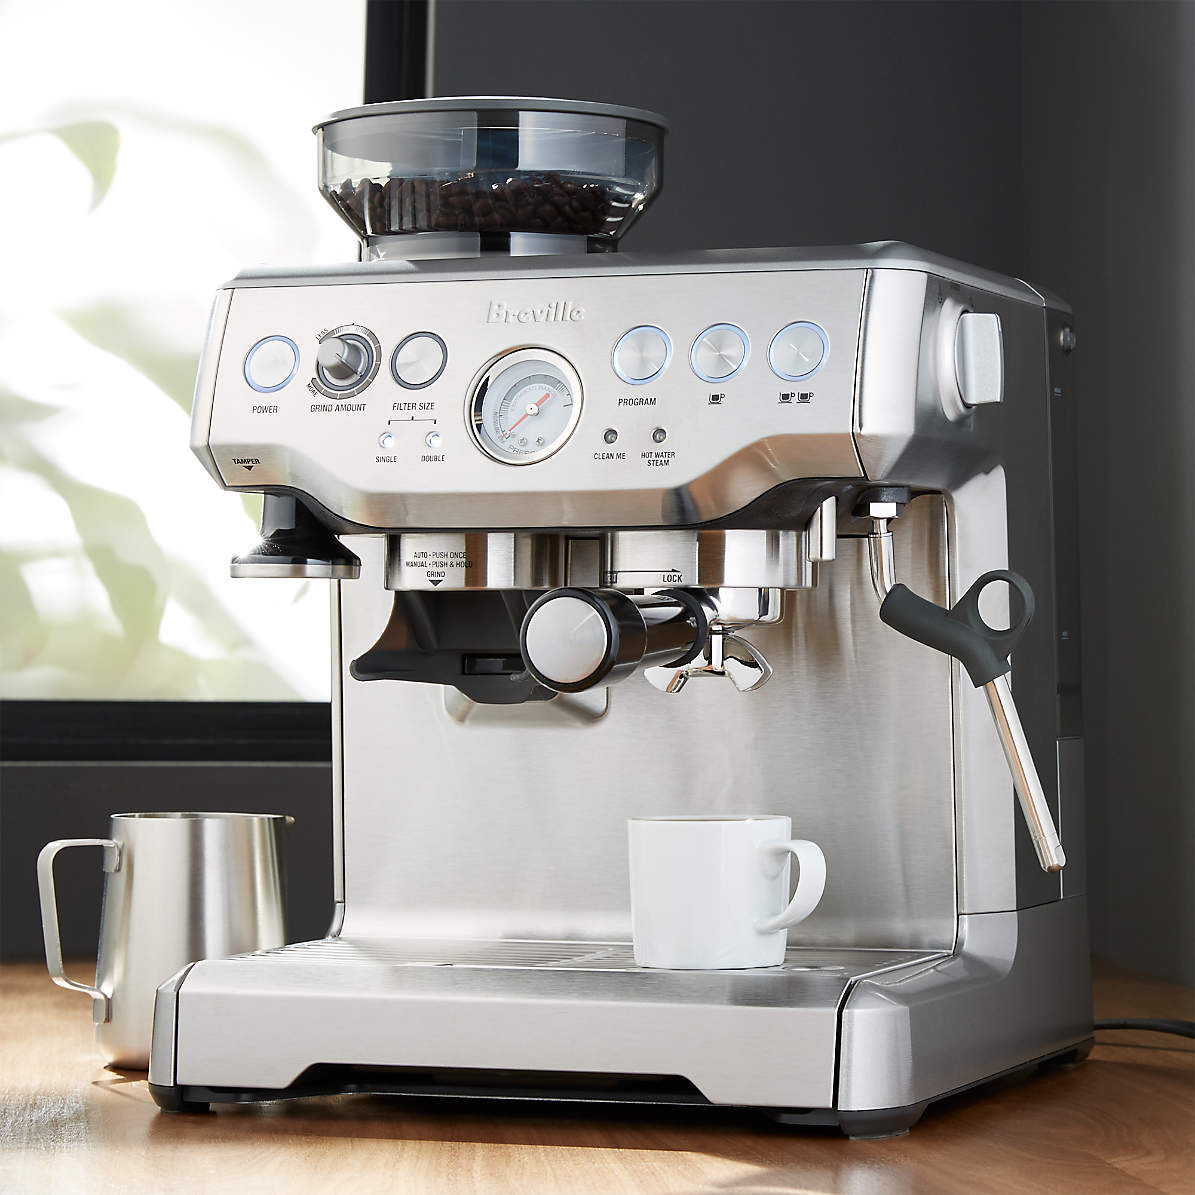 Breville Barista Express Espresso Machine Reviews Crate And Barrel,How To Grow Cilantro Indoors